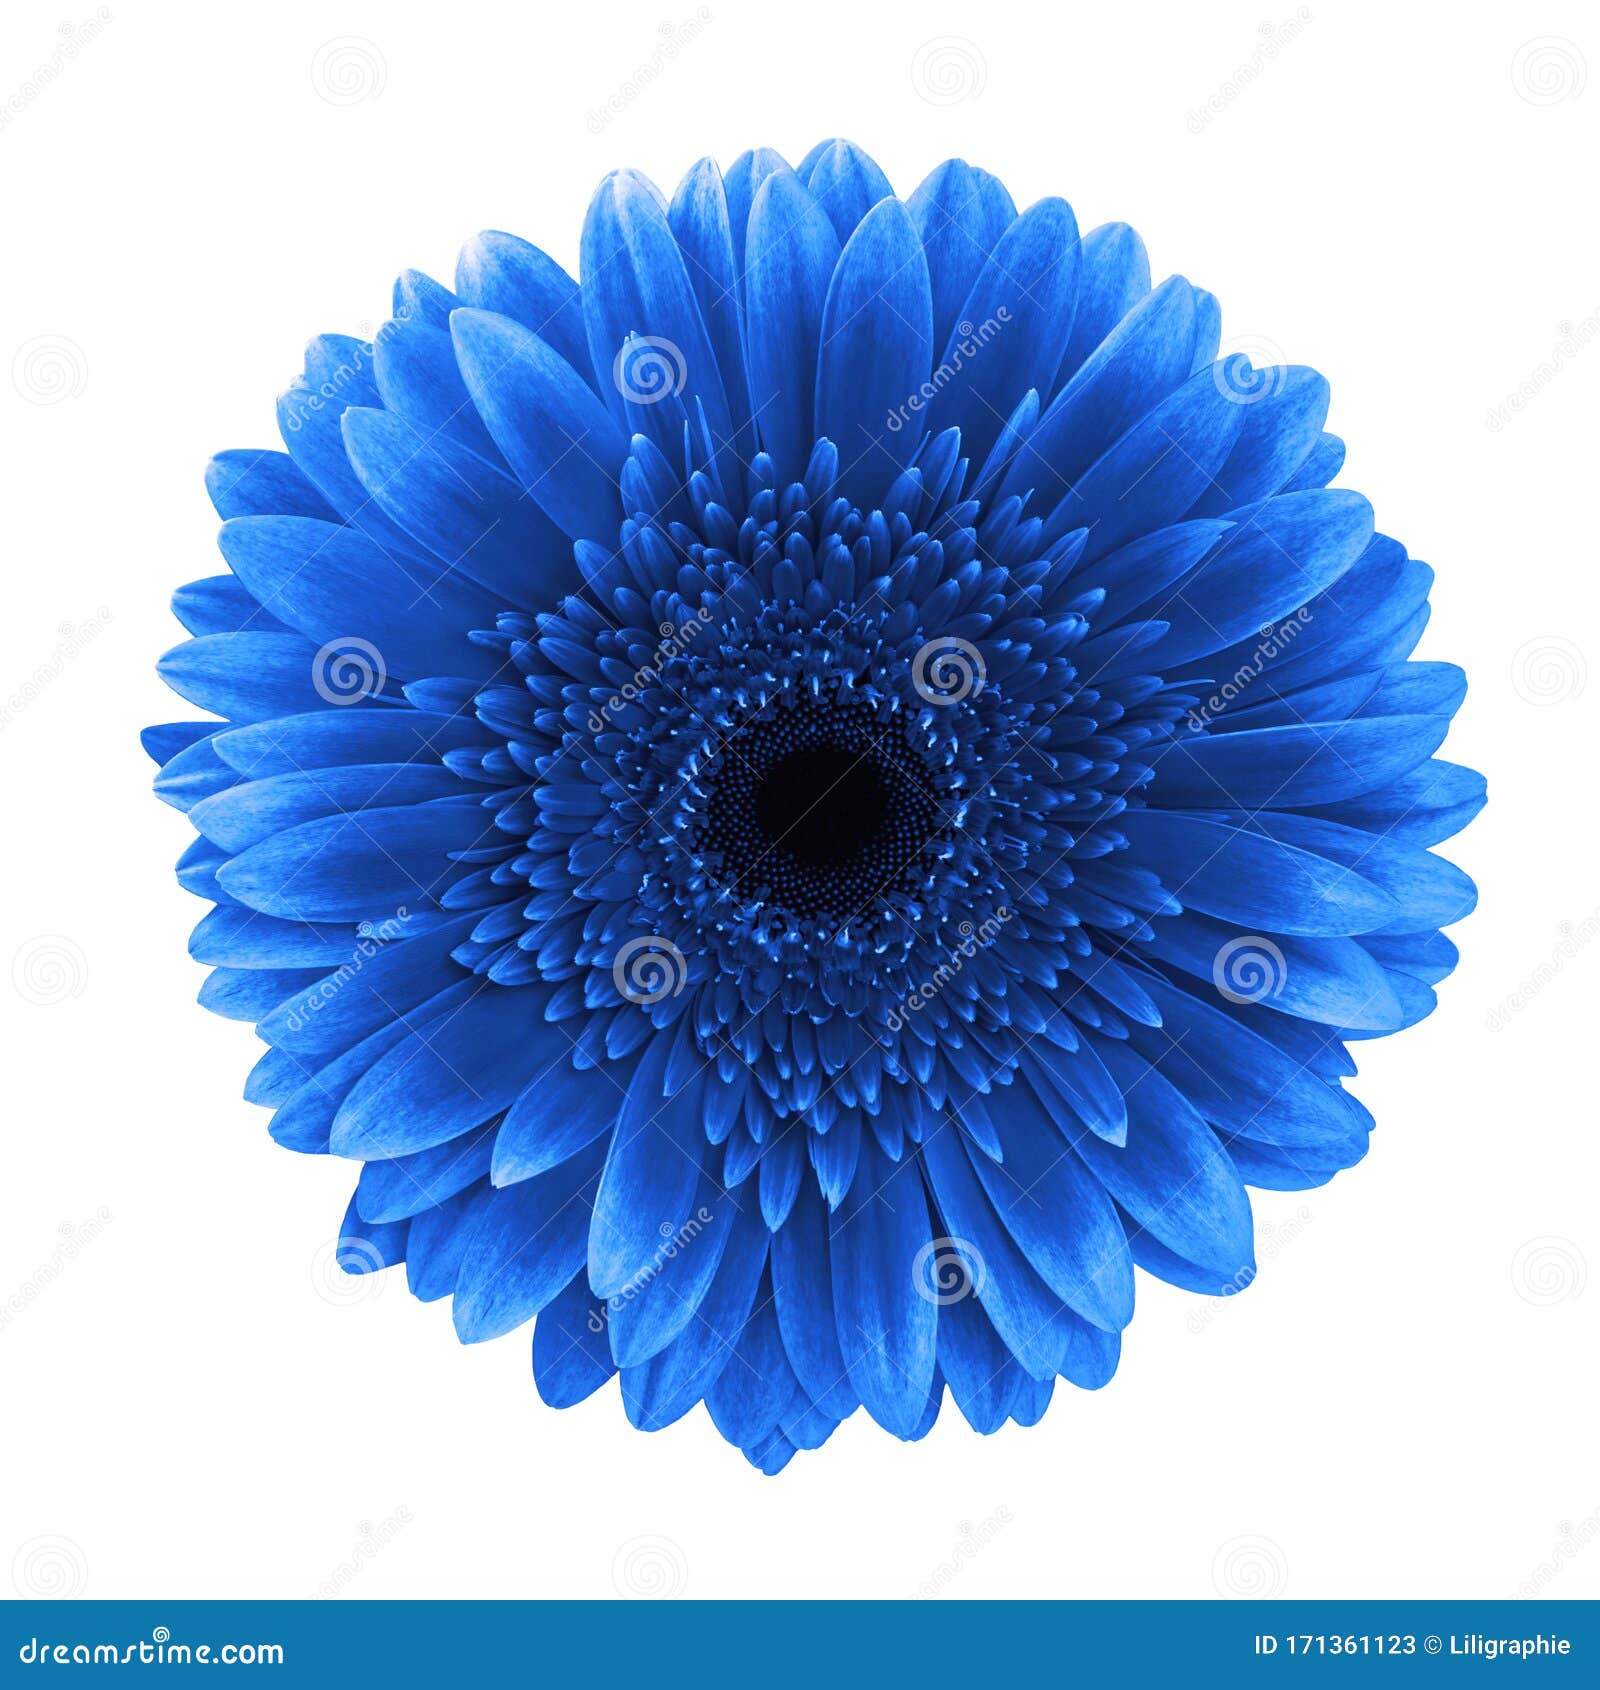 blue gerbera daisy flower  white background clipping path